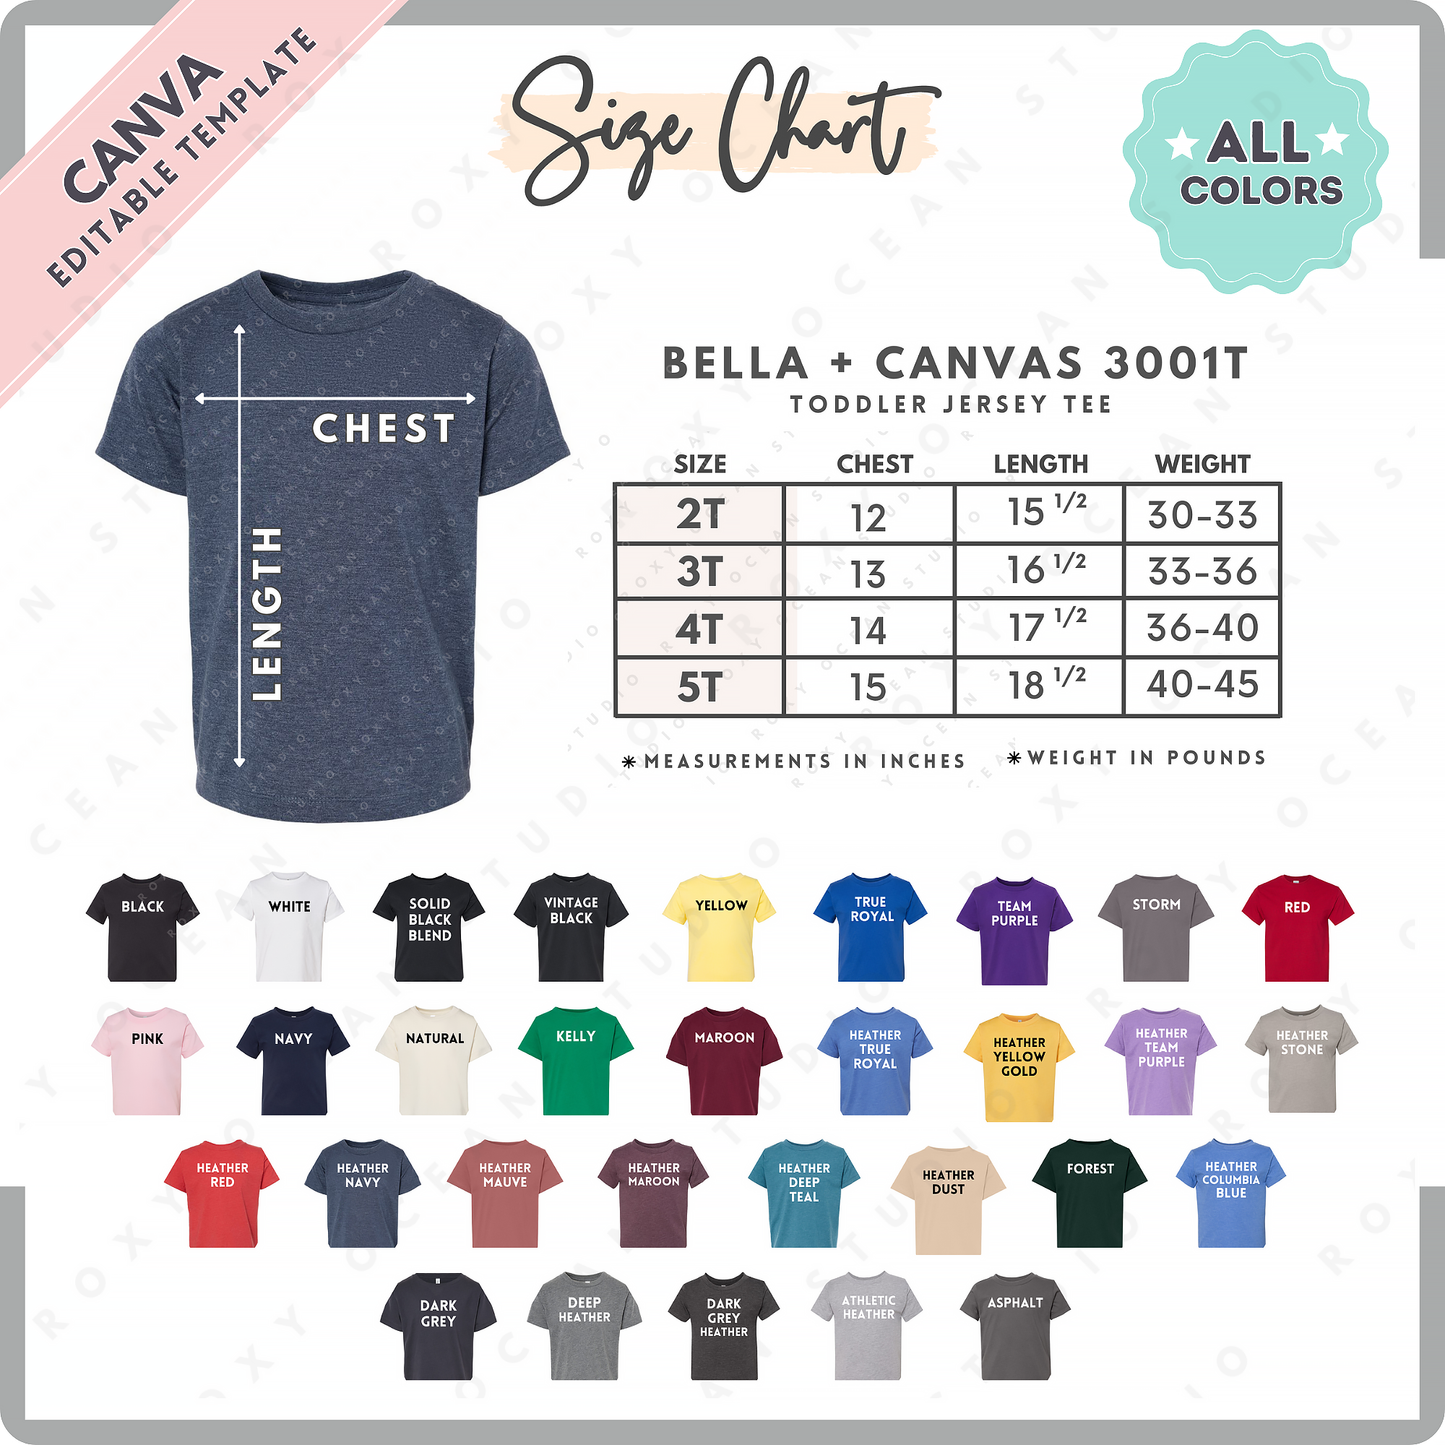 Bella + Canvas 3001T Toddler Size Chart + Color Chart (Editable)